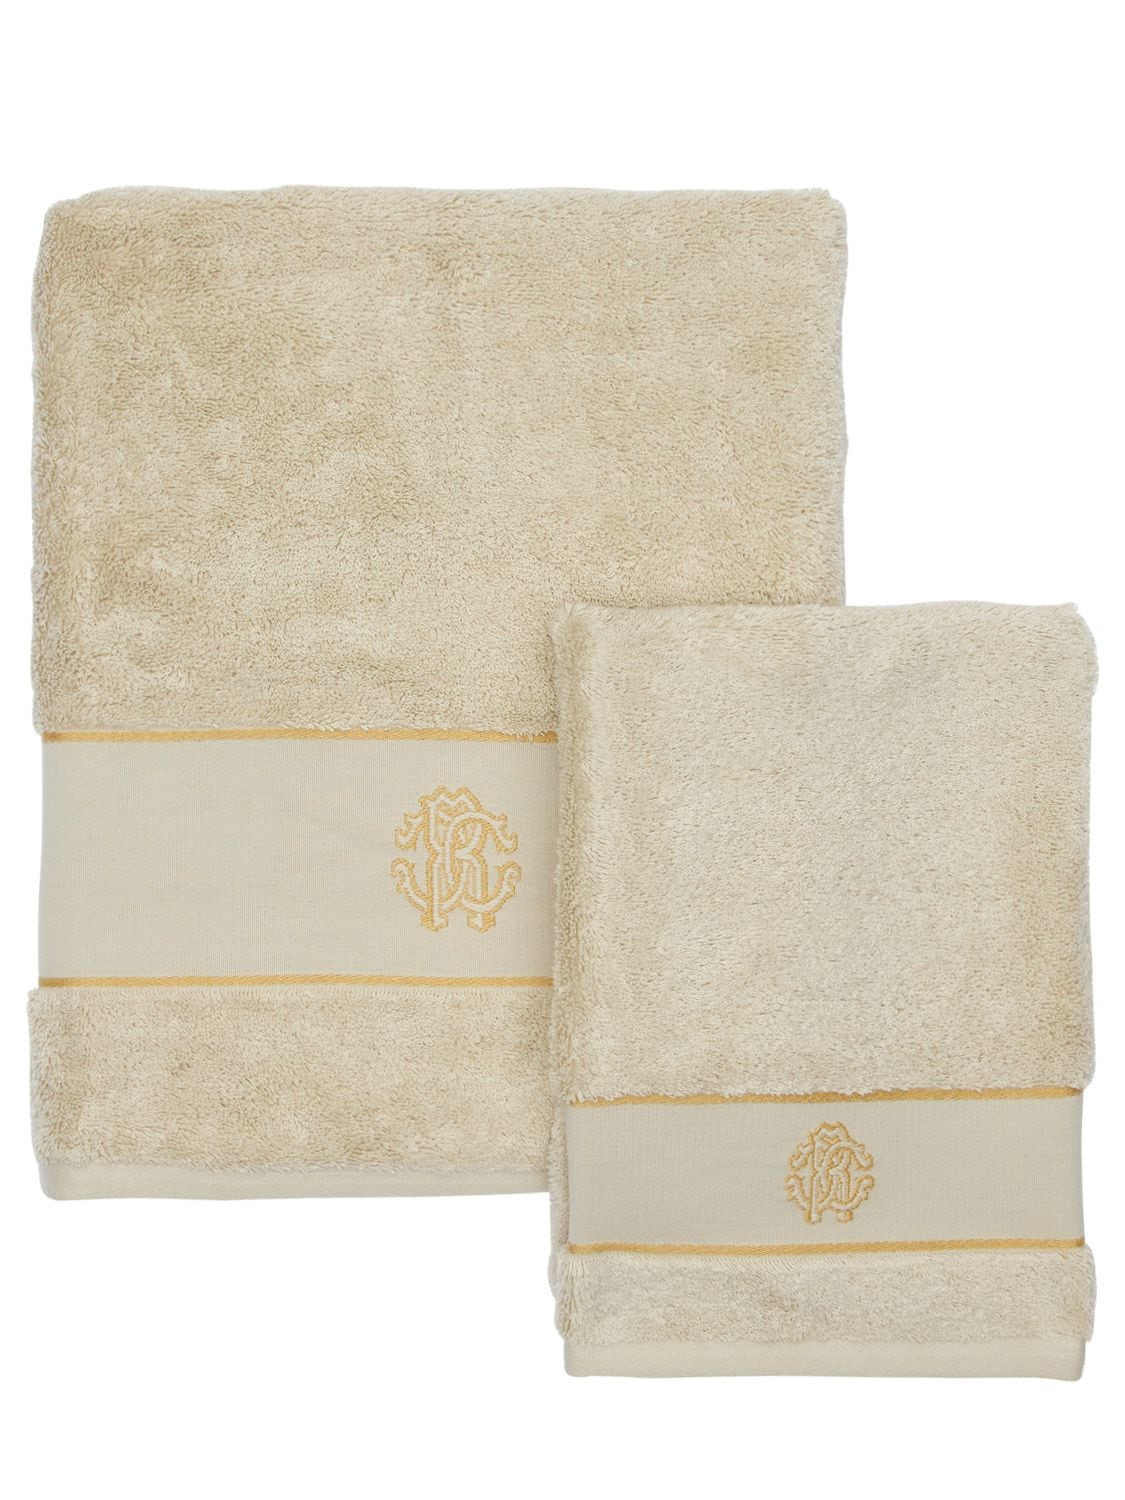 Roberto Cavalli Set Of 2 New Gold Towels In Sand